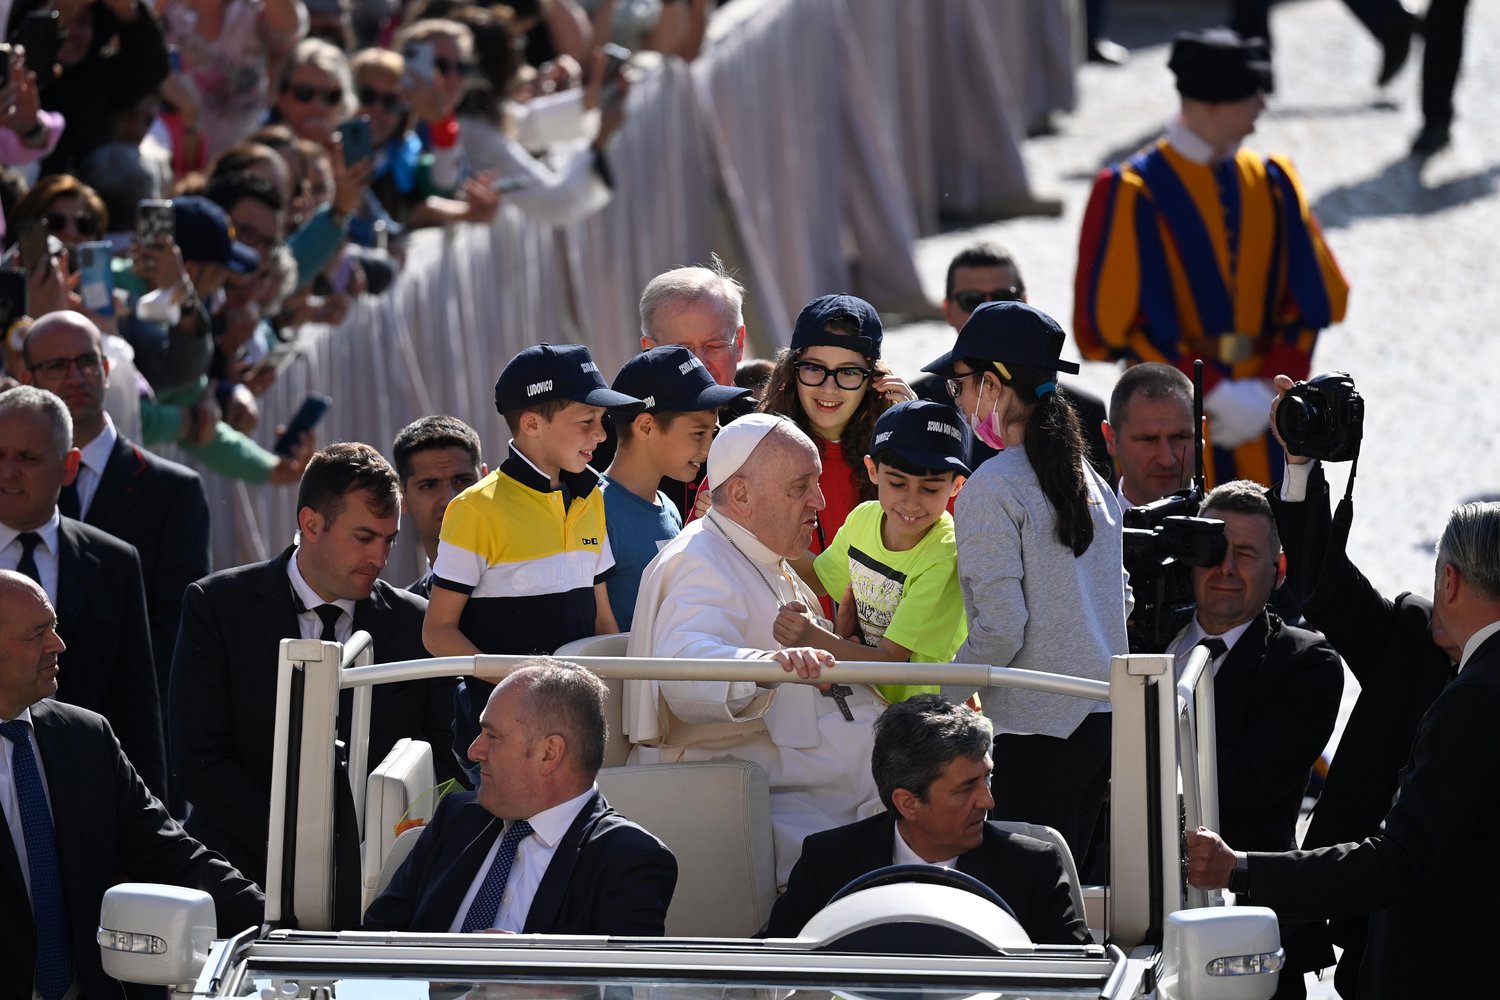 Pope Francis welcomes youngsters to take a ride with him in the popemobile at the beginning of his weekly general audience May 11 in St. Peter’s Square at the Vatican.